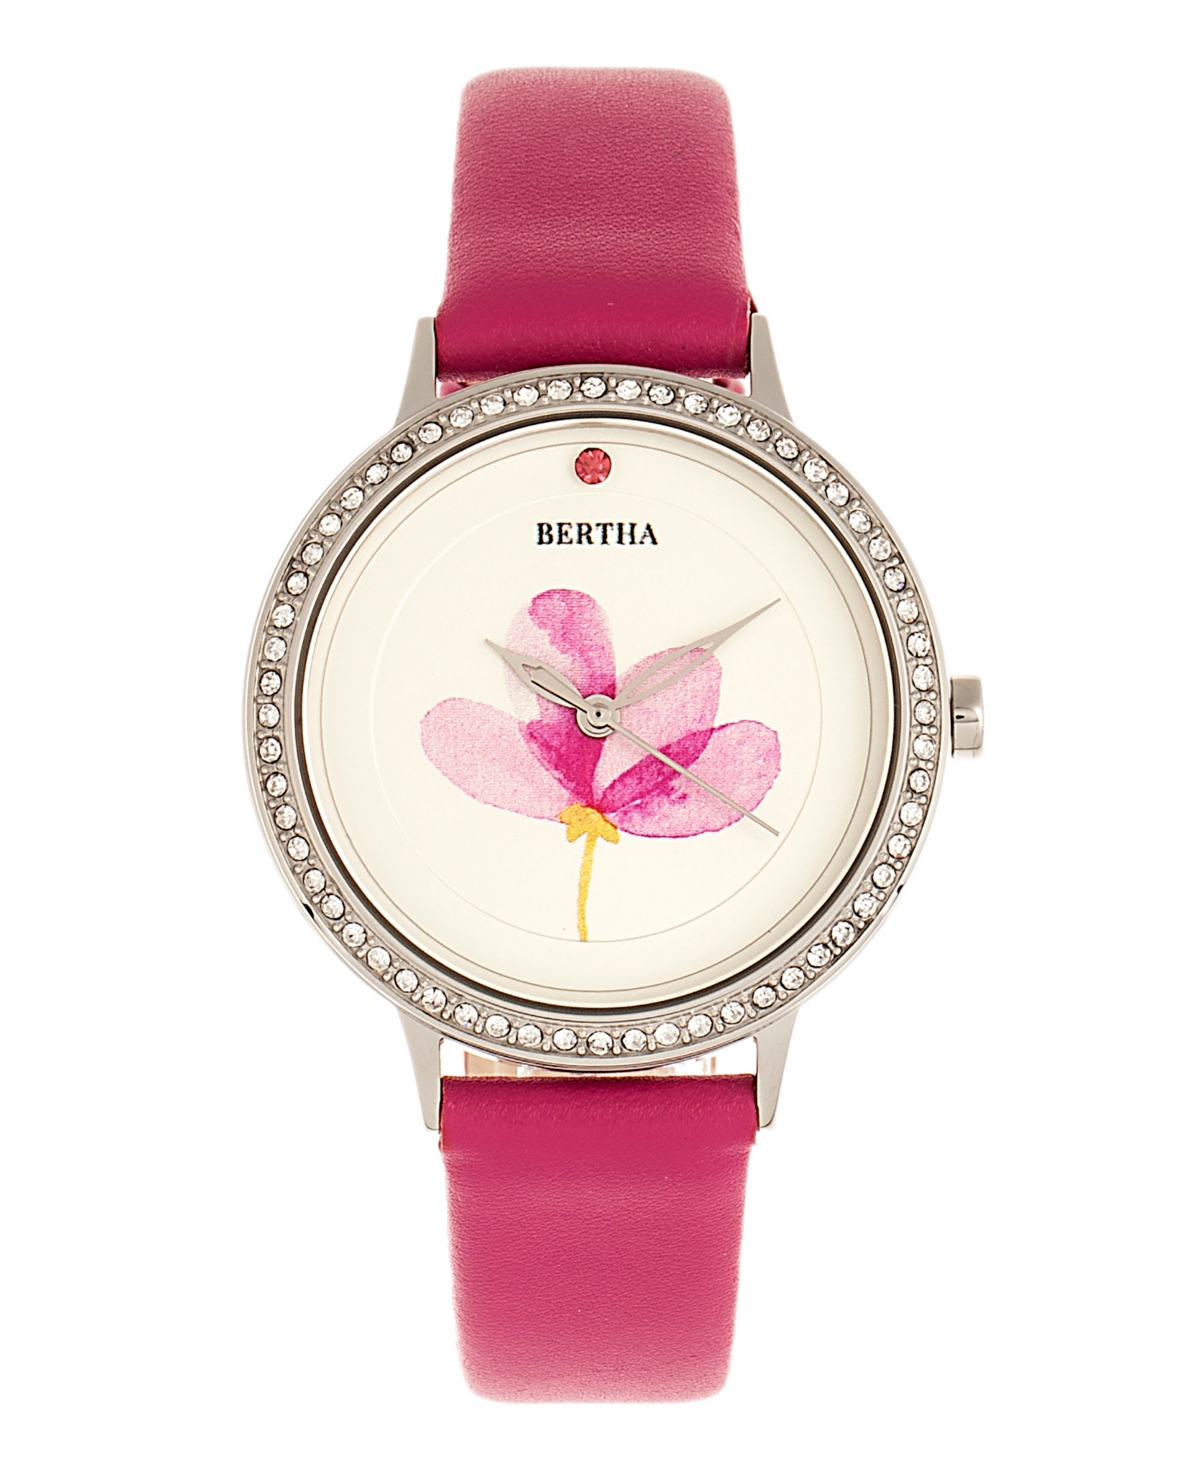 Bertha Delilah Mint or Lavender or Fuchsia or Light Pink Genuine Leather Band Watch, 38mm